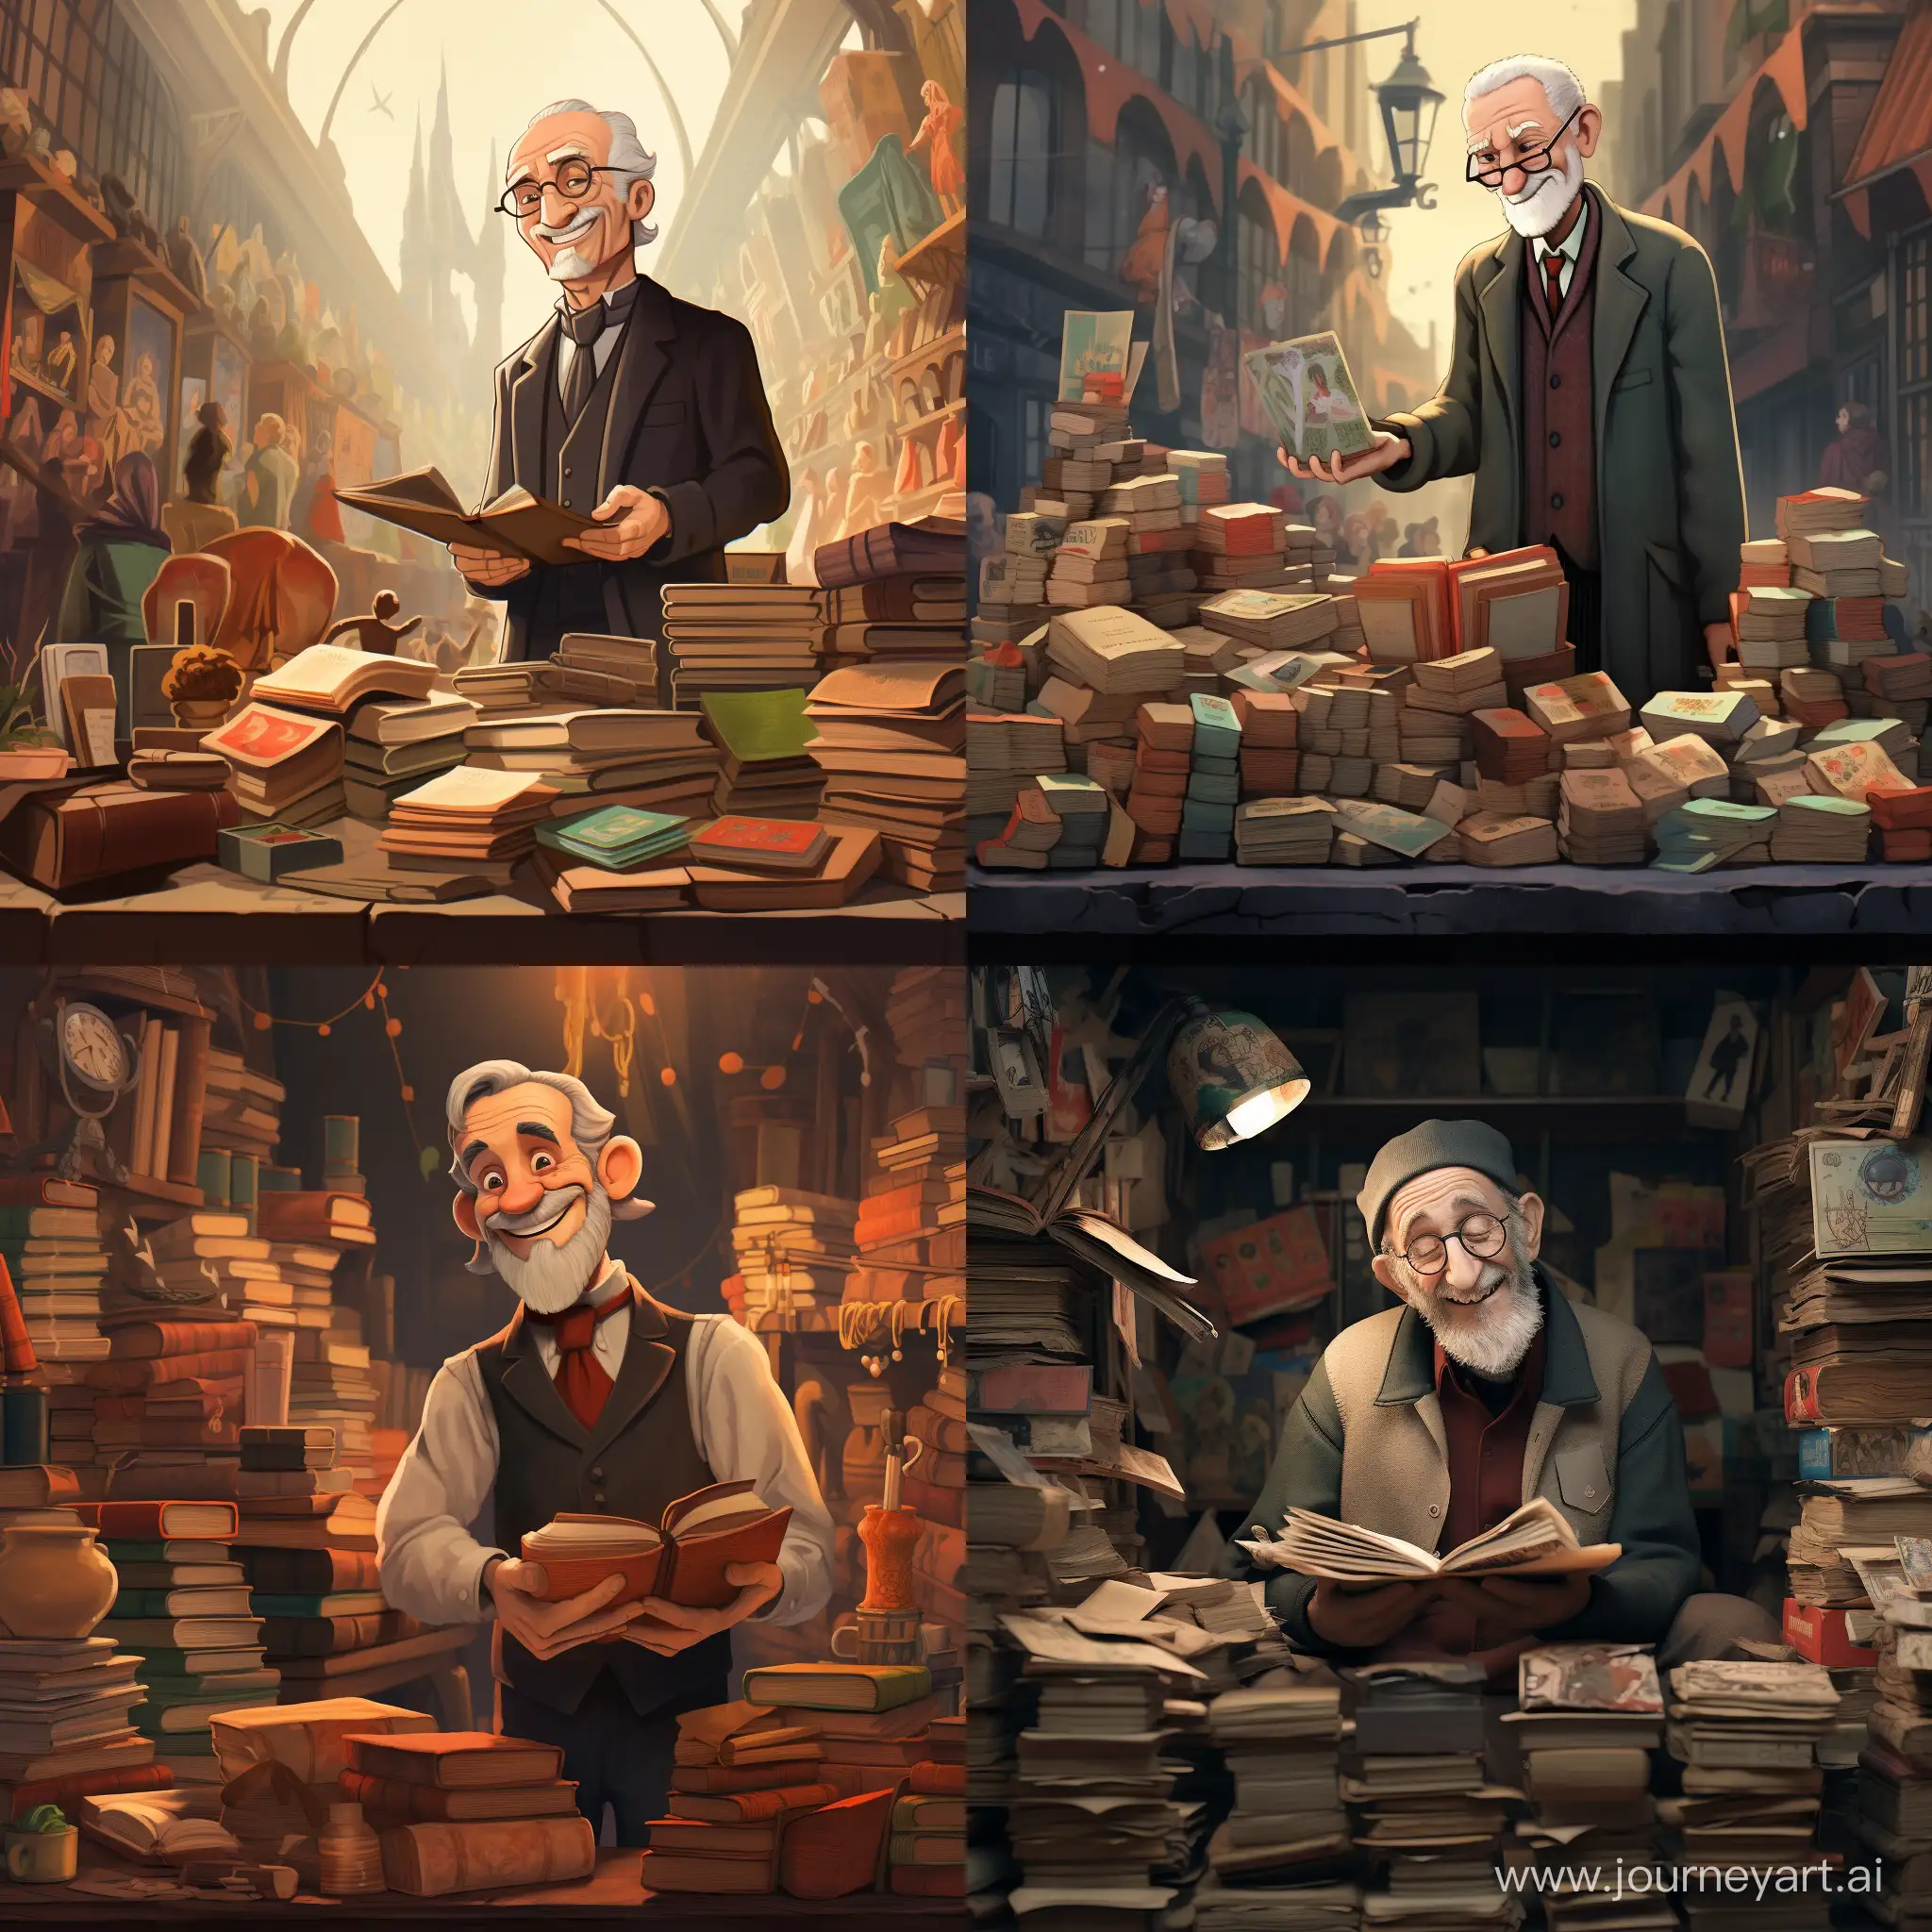 An animated man selling old books